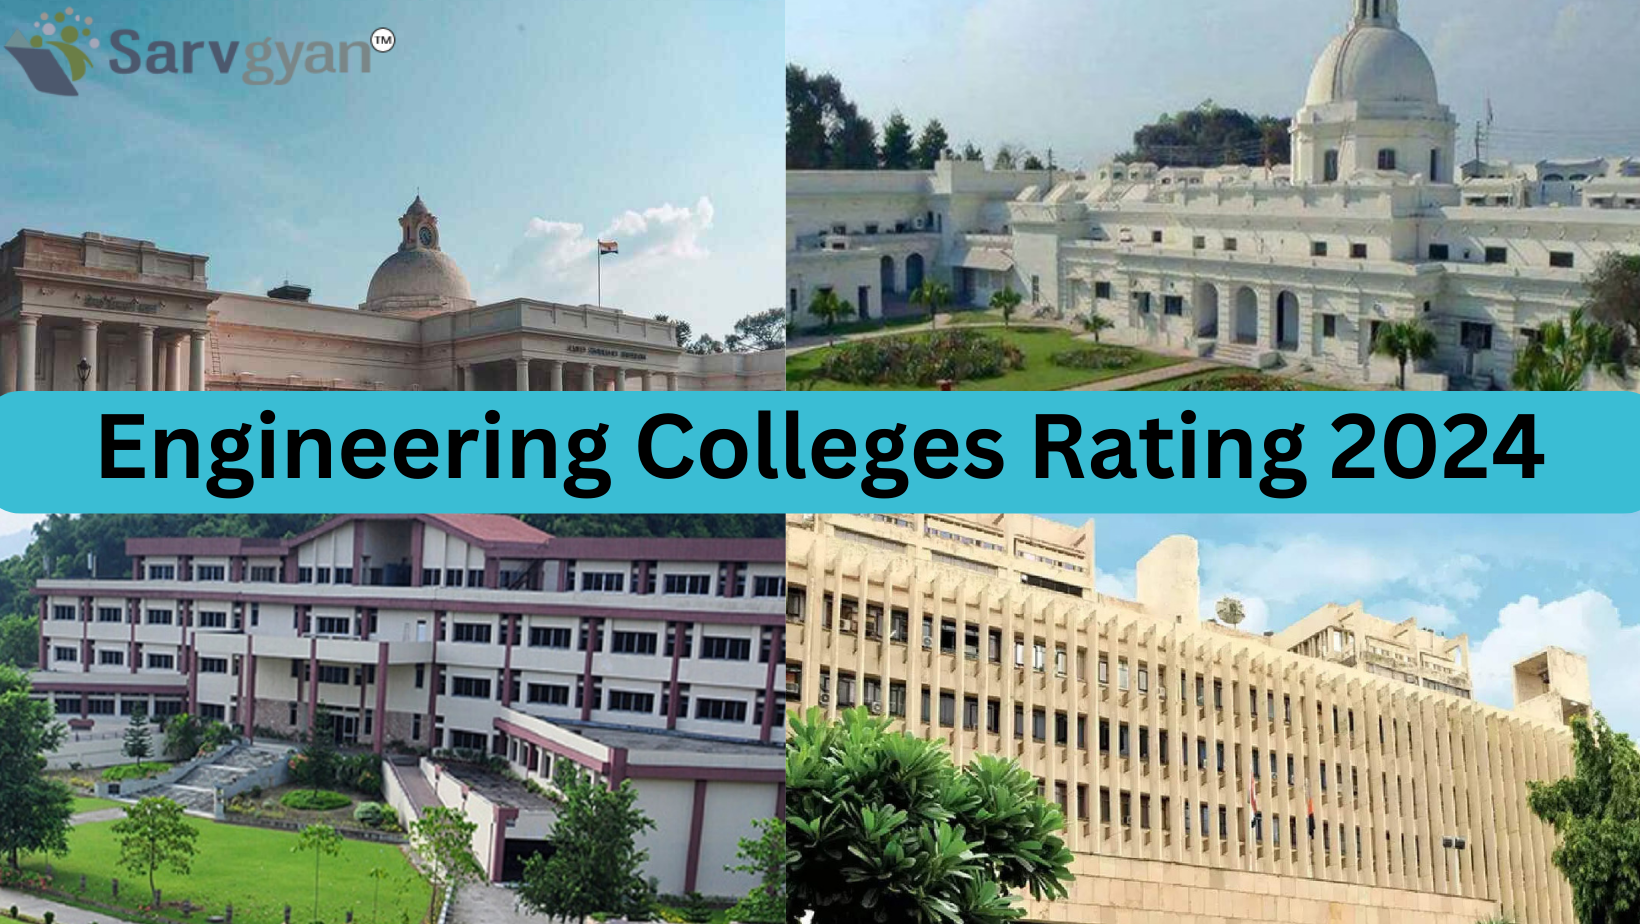 Engineering Colleges Rating 2024